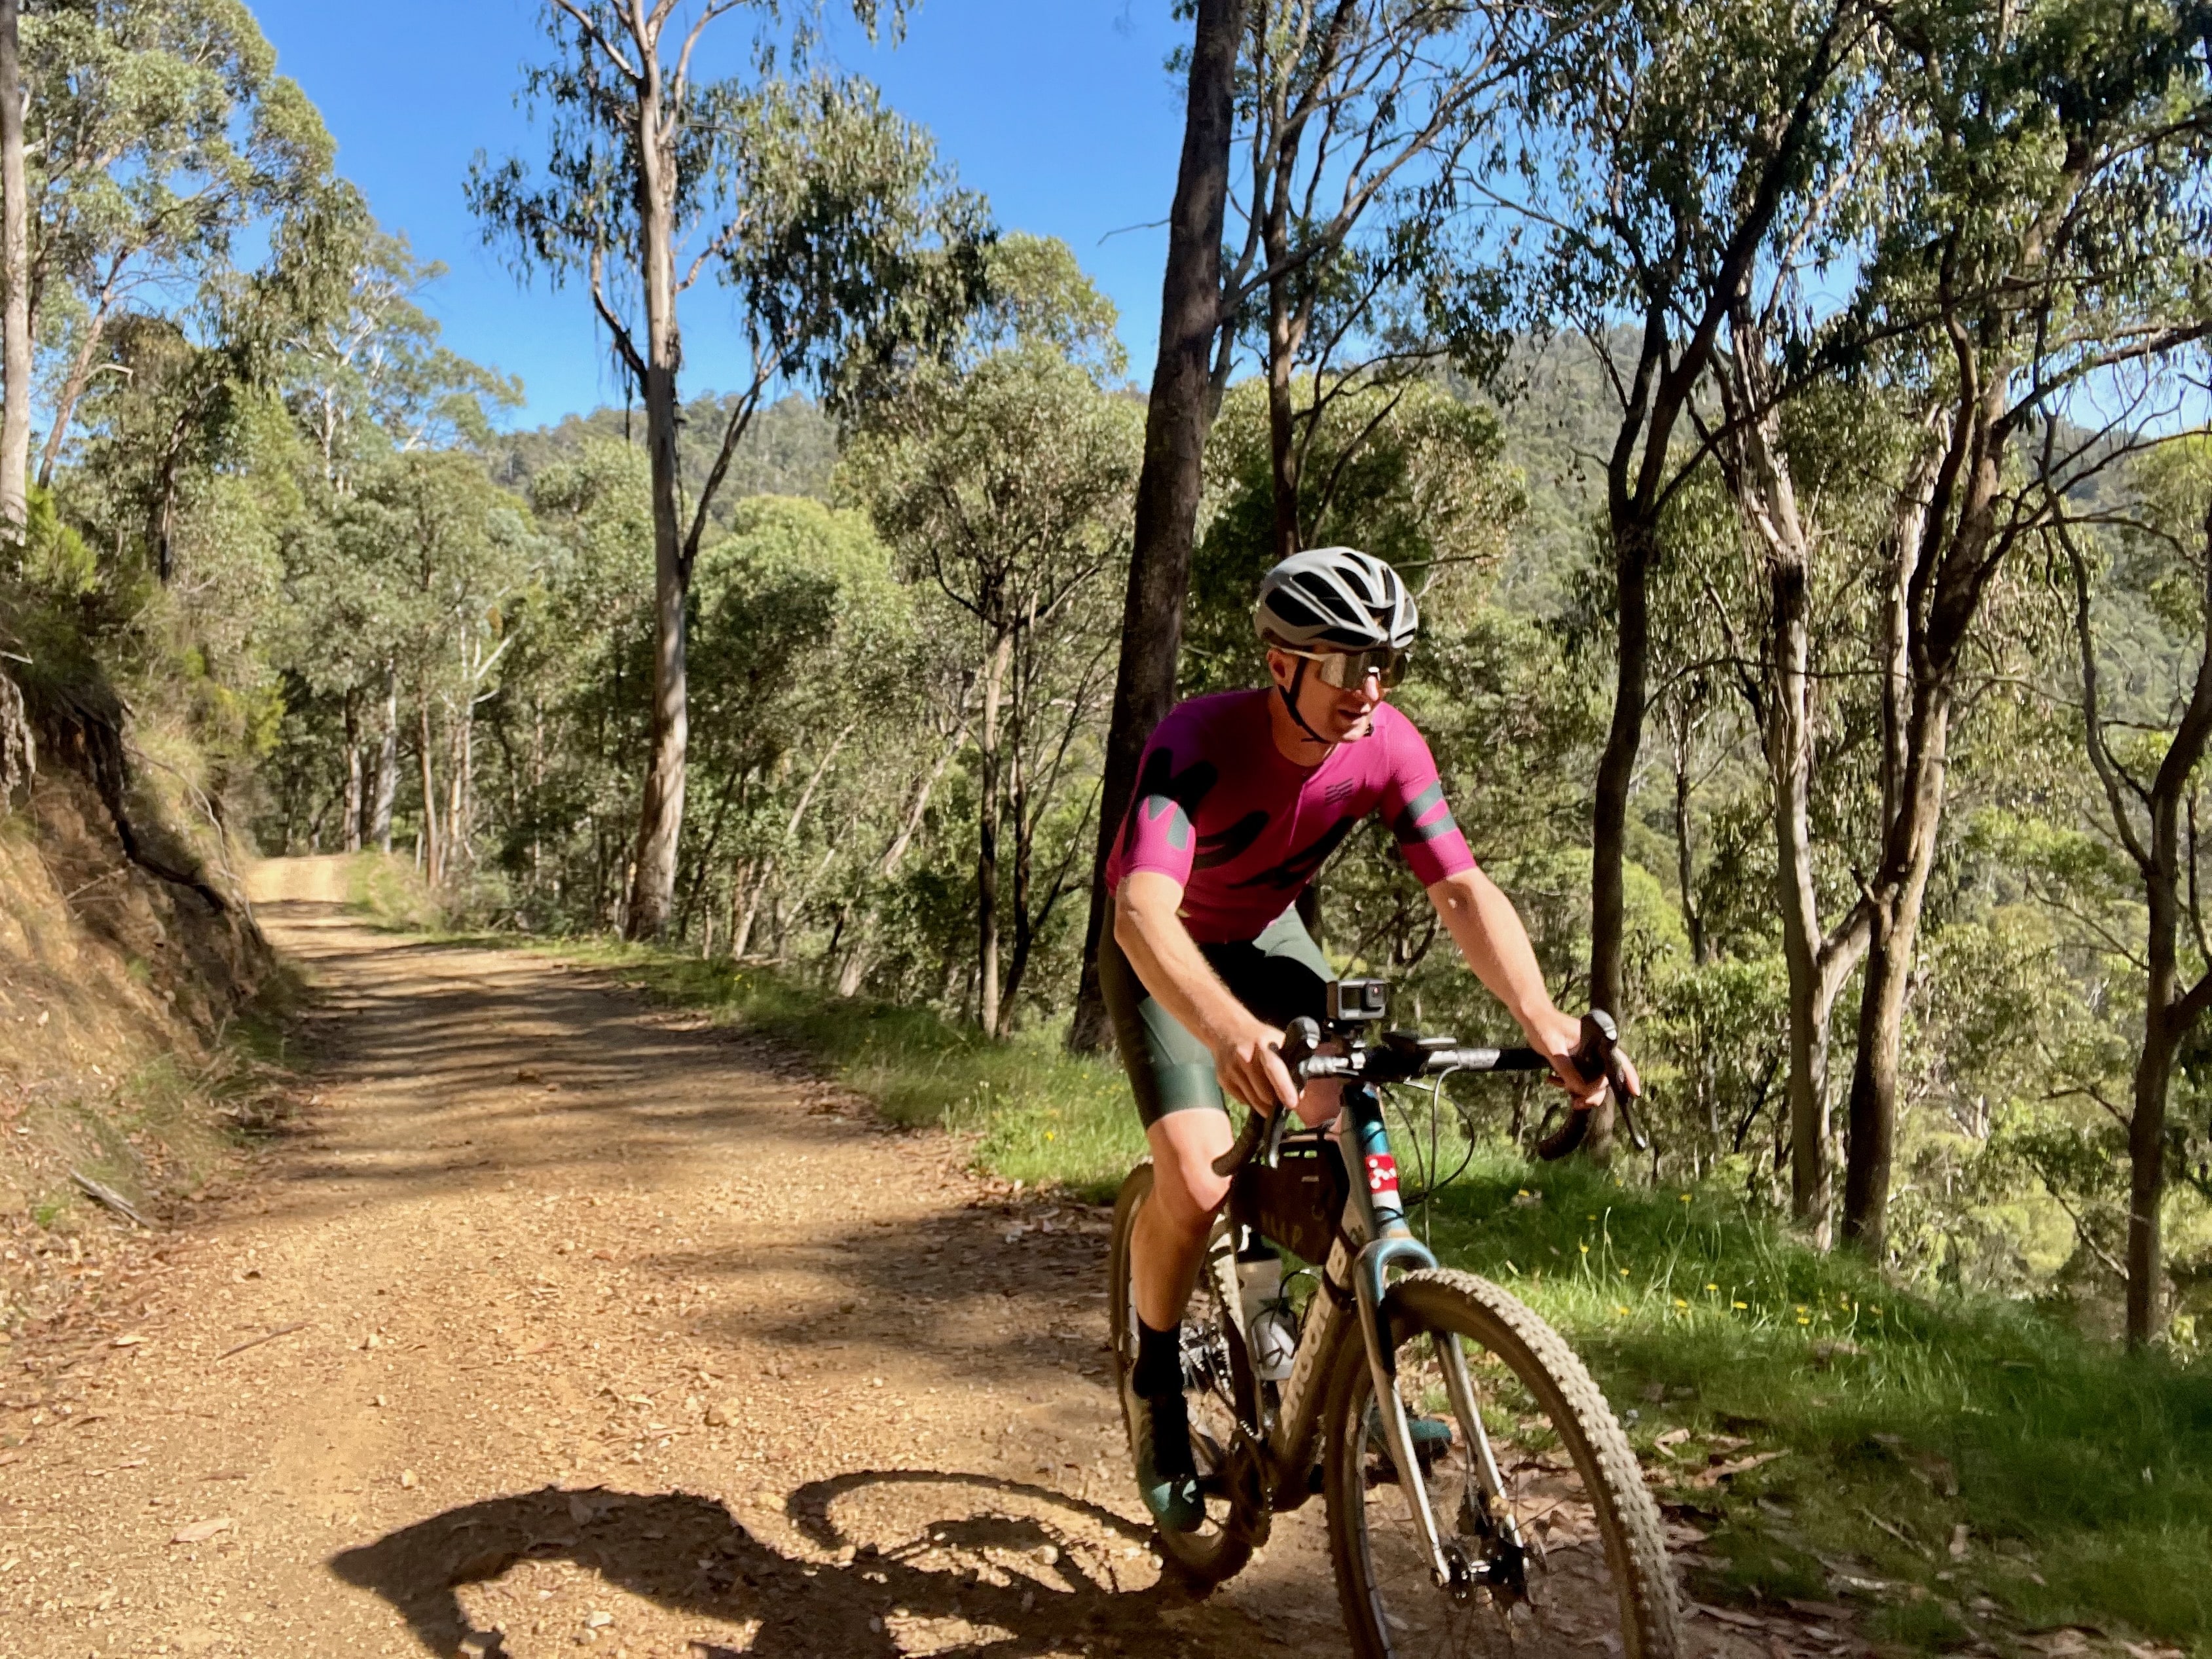 Two cyclists riding on a mountain gravel road through the forest on a sunny day